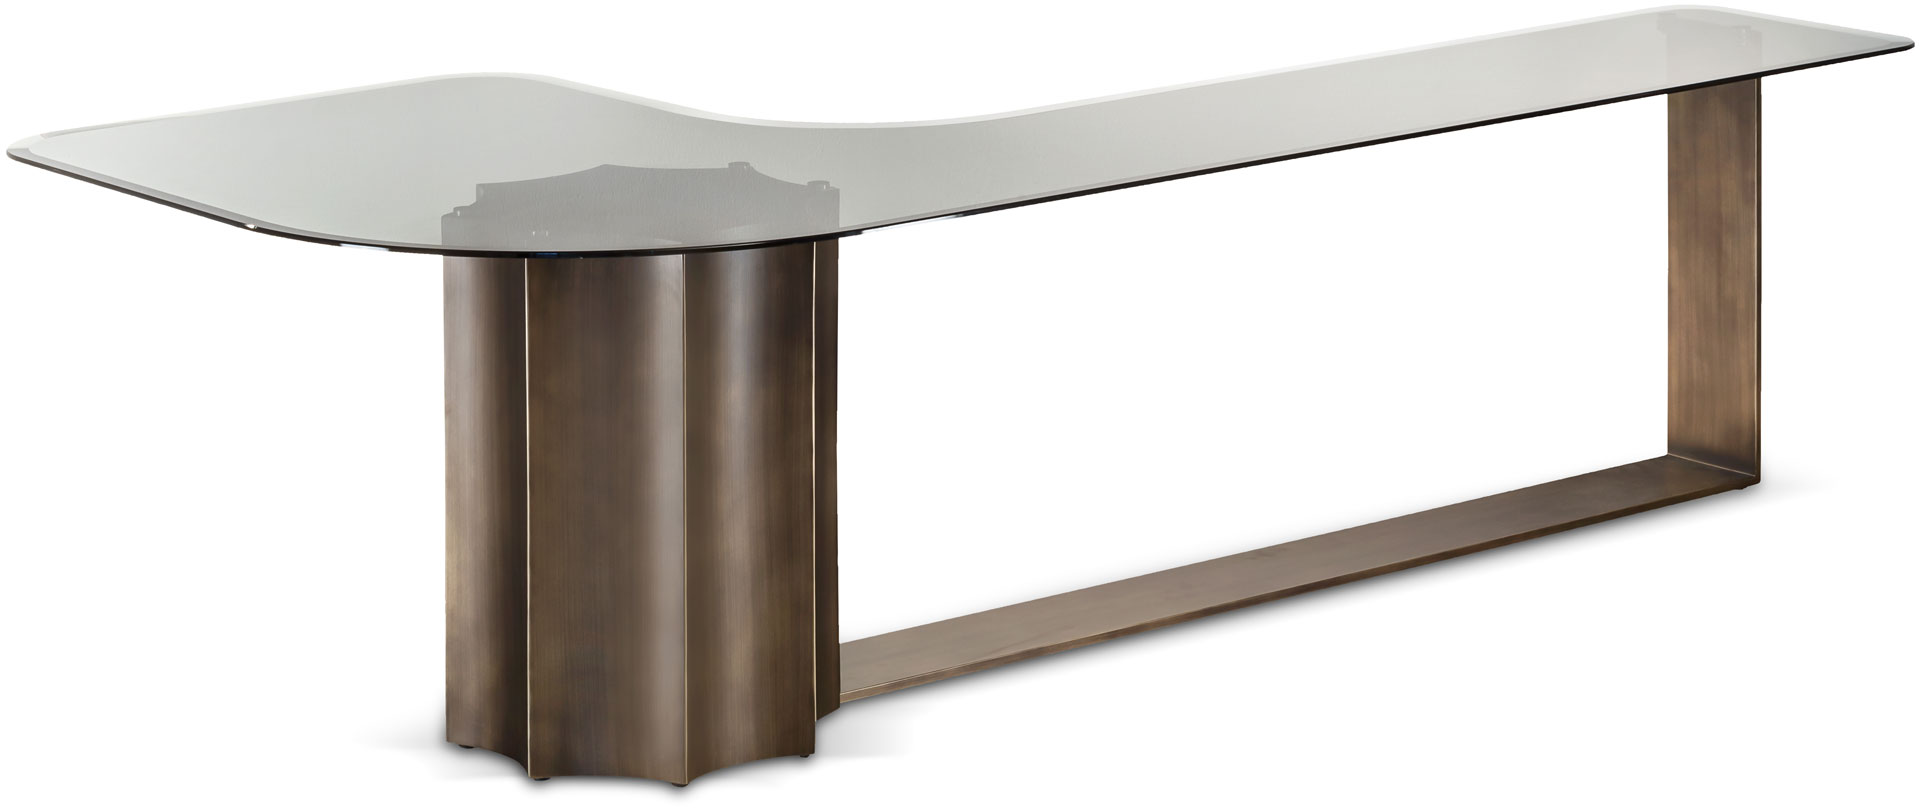 Florio curved coffee table - Cantori